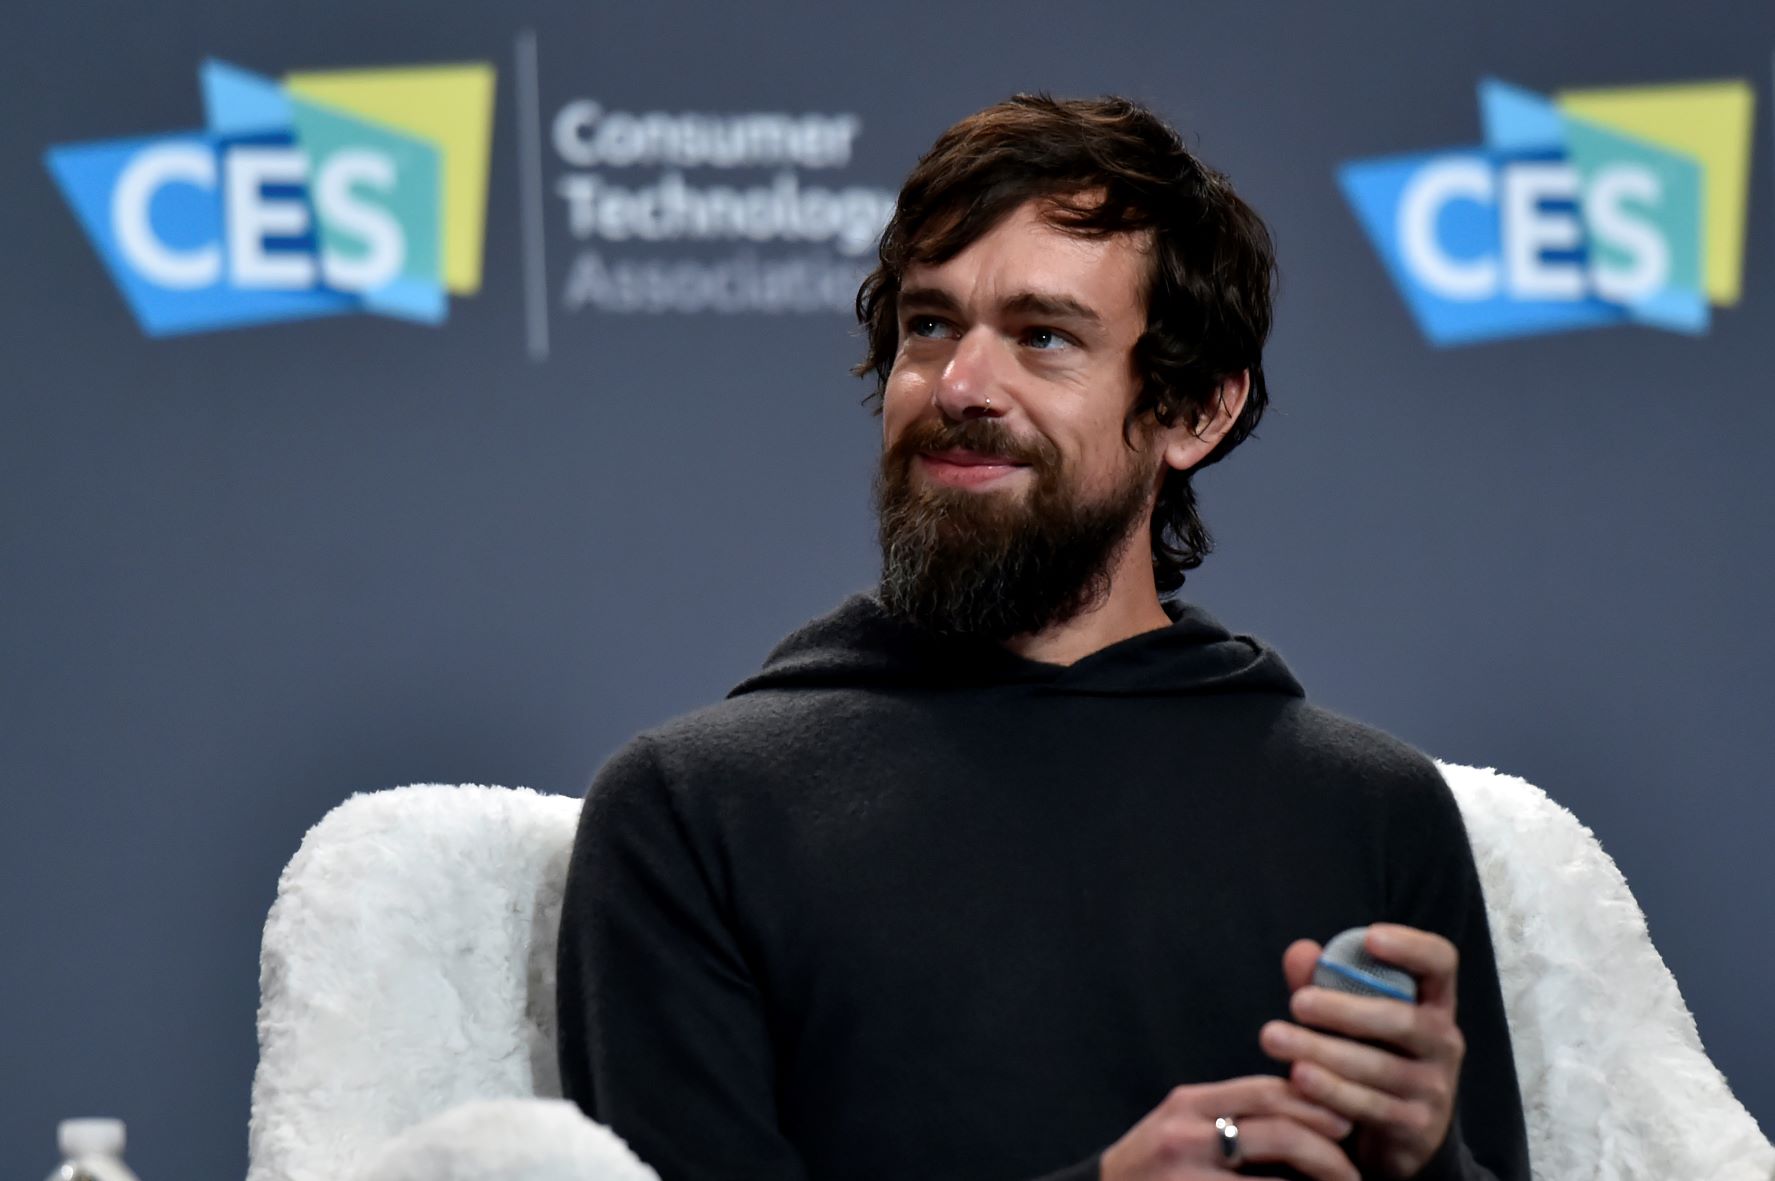 Former Twitter CEO Jack Dorsey Says He ‘Owns Responsibility’ for Company’s Mass Layoffs